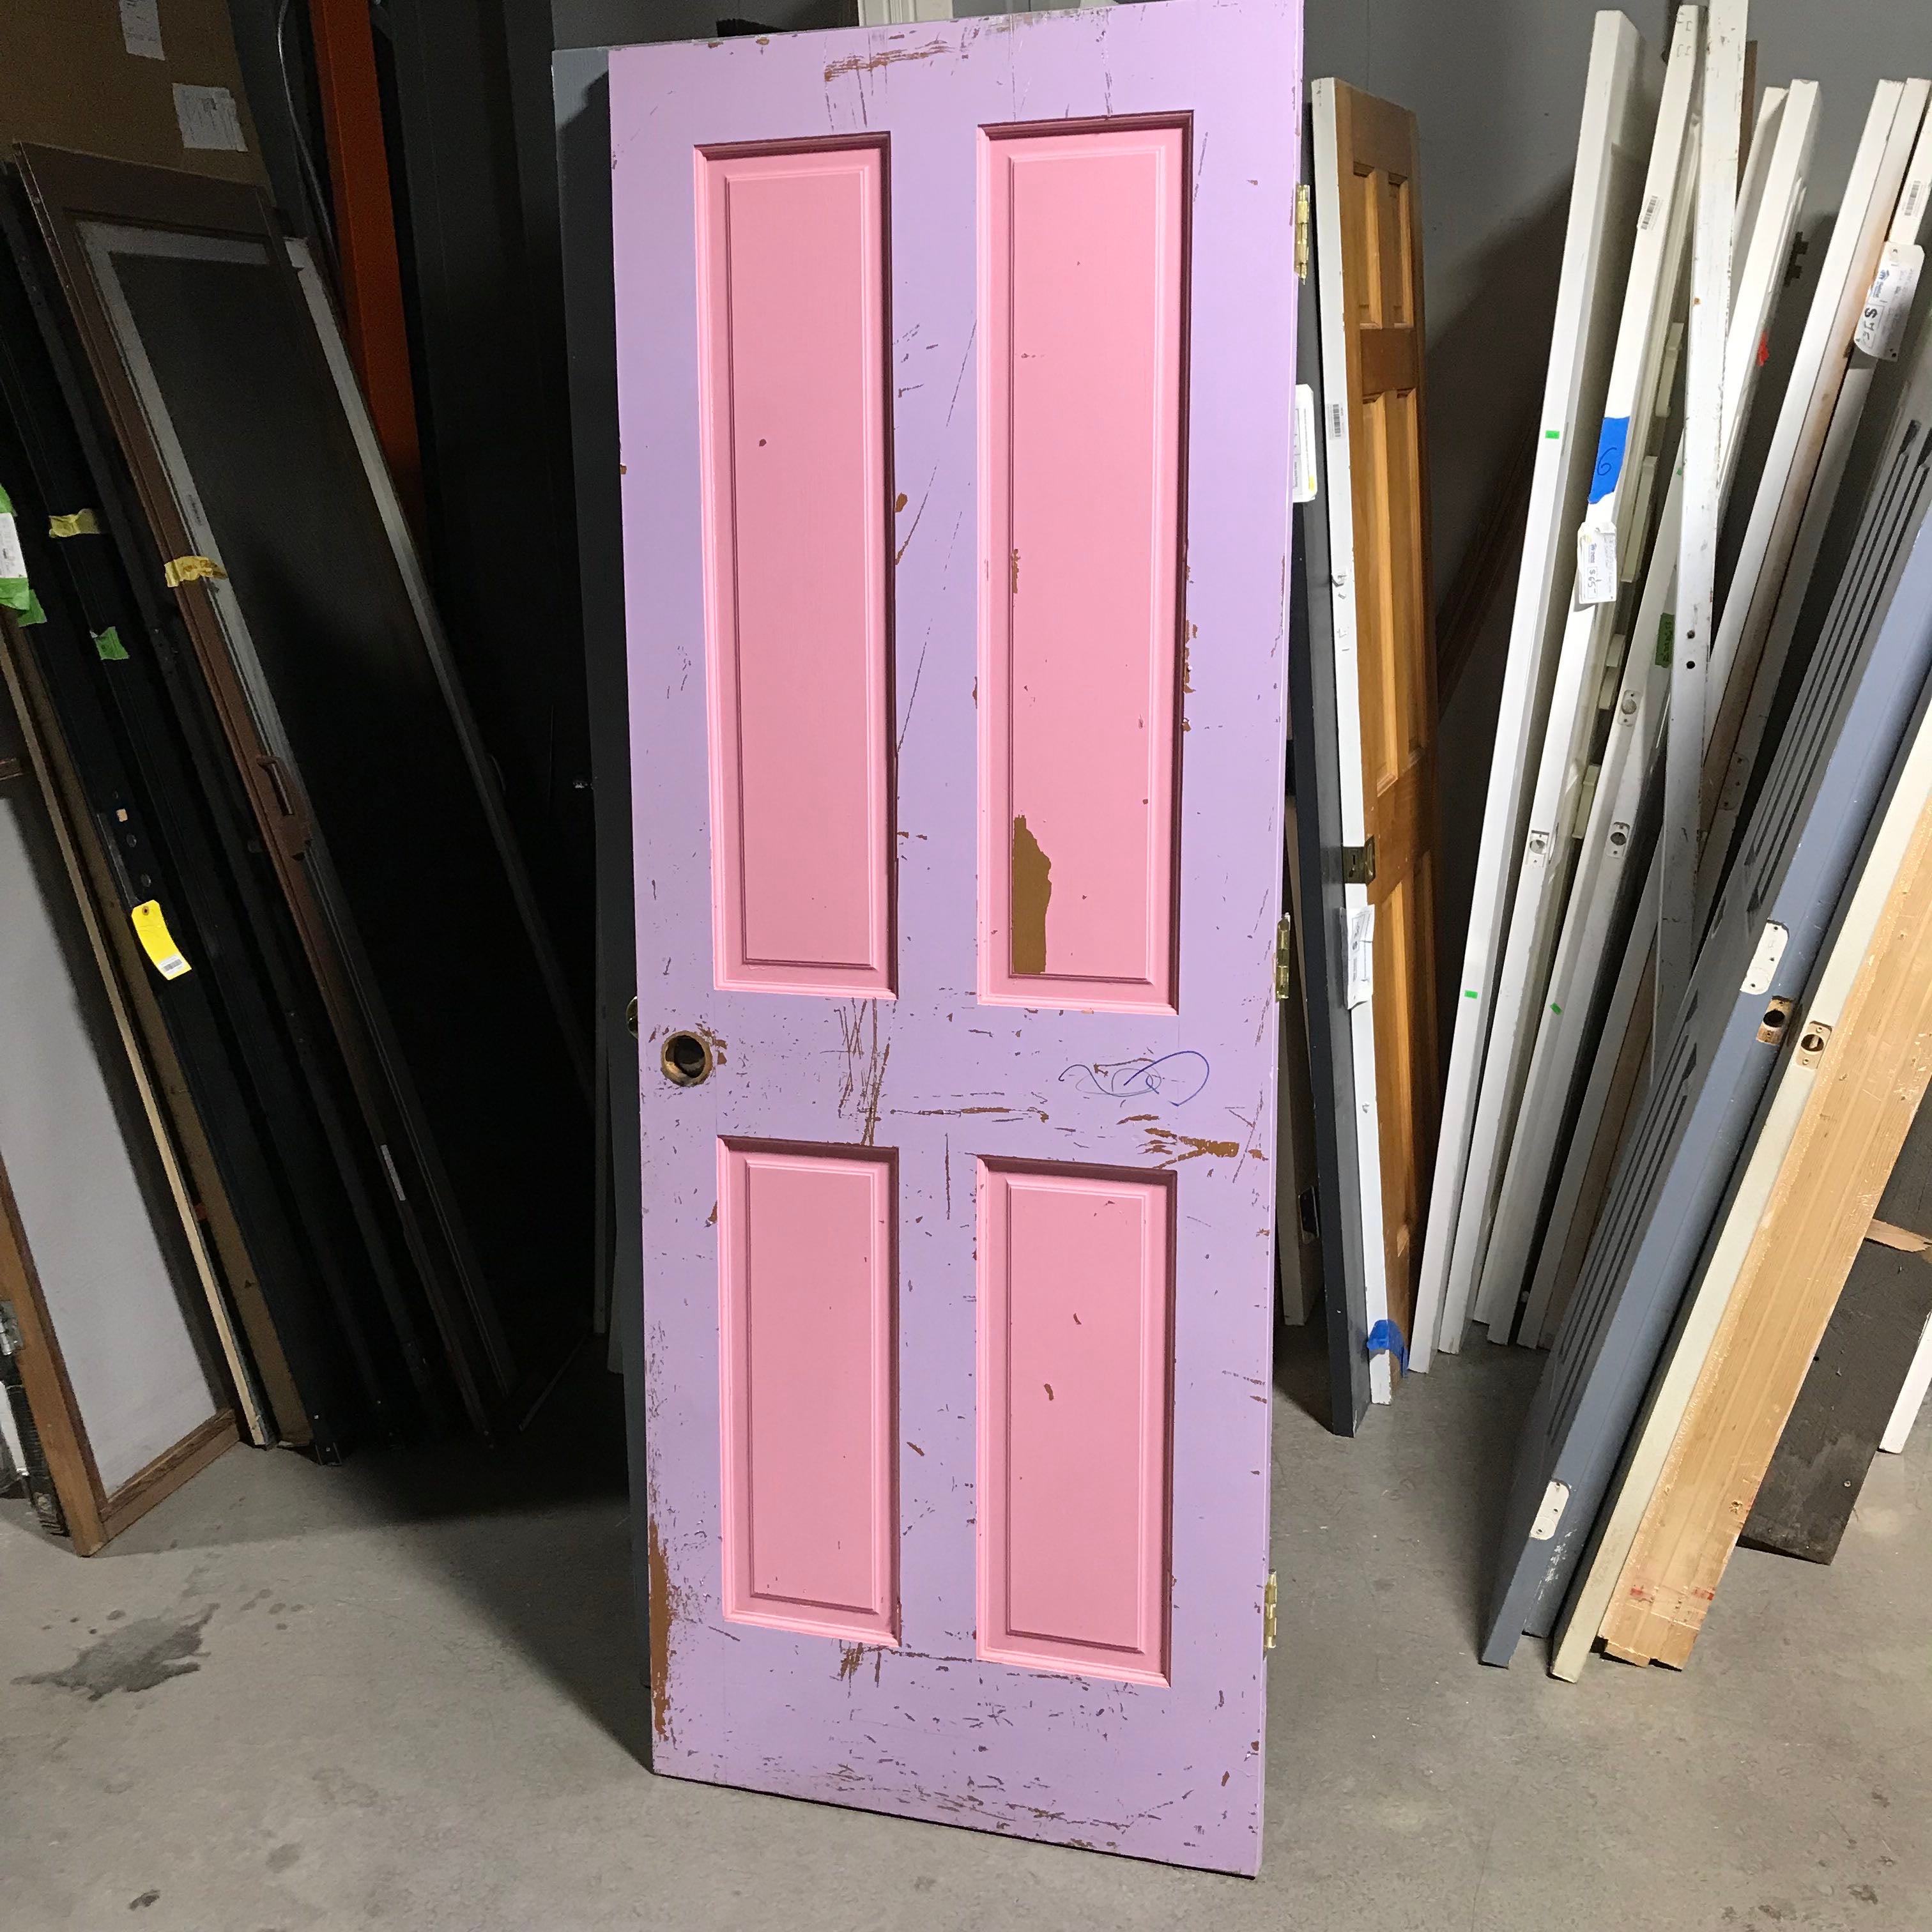 29.75"x 79.75"x 1.375" 4 Panel One Side Pink Purple Other Side Painted White Solid Pine Interior Door